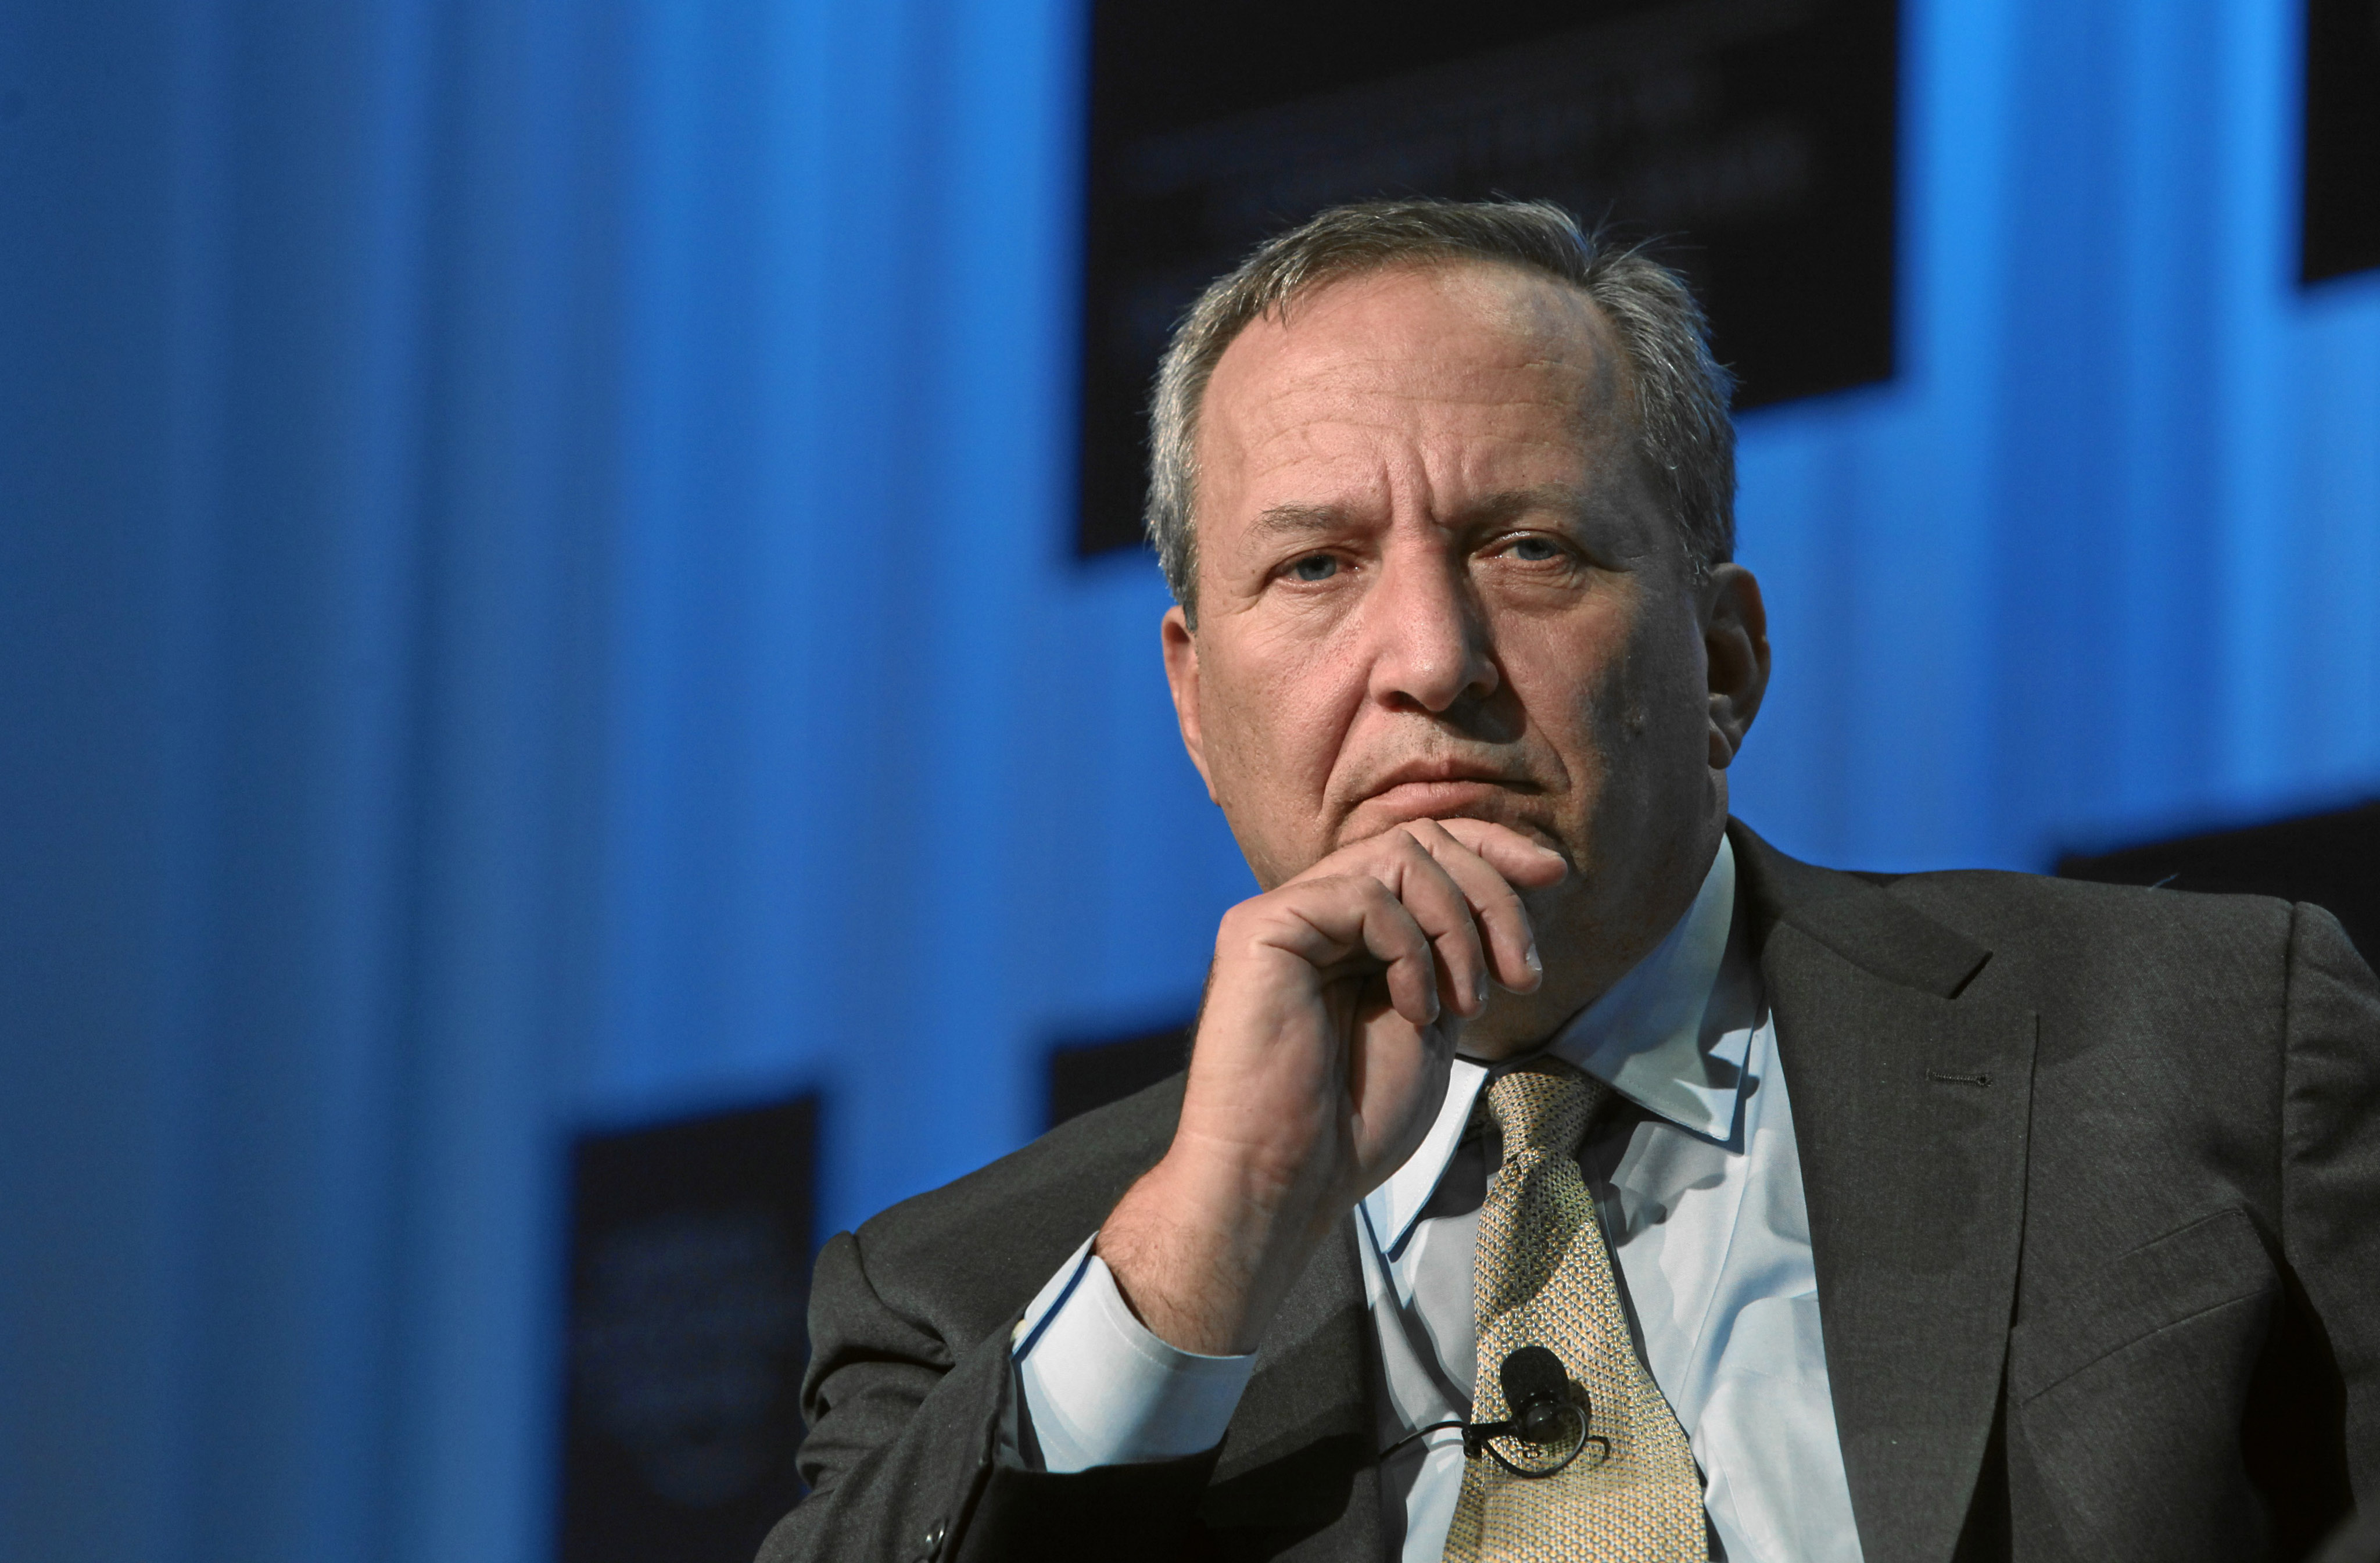 <p><span>Lawrence Summers’ economic commentary influences monetary policy and the markets, and he remains one of the preeminent economists of our time</span><span> </span></p>